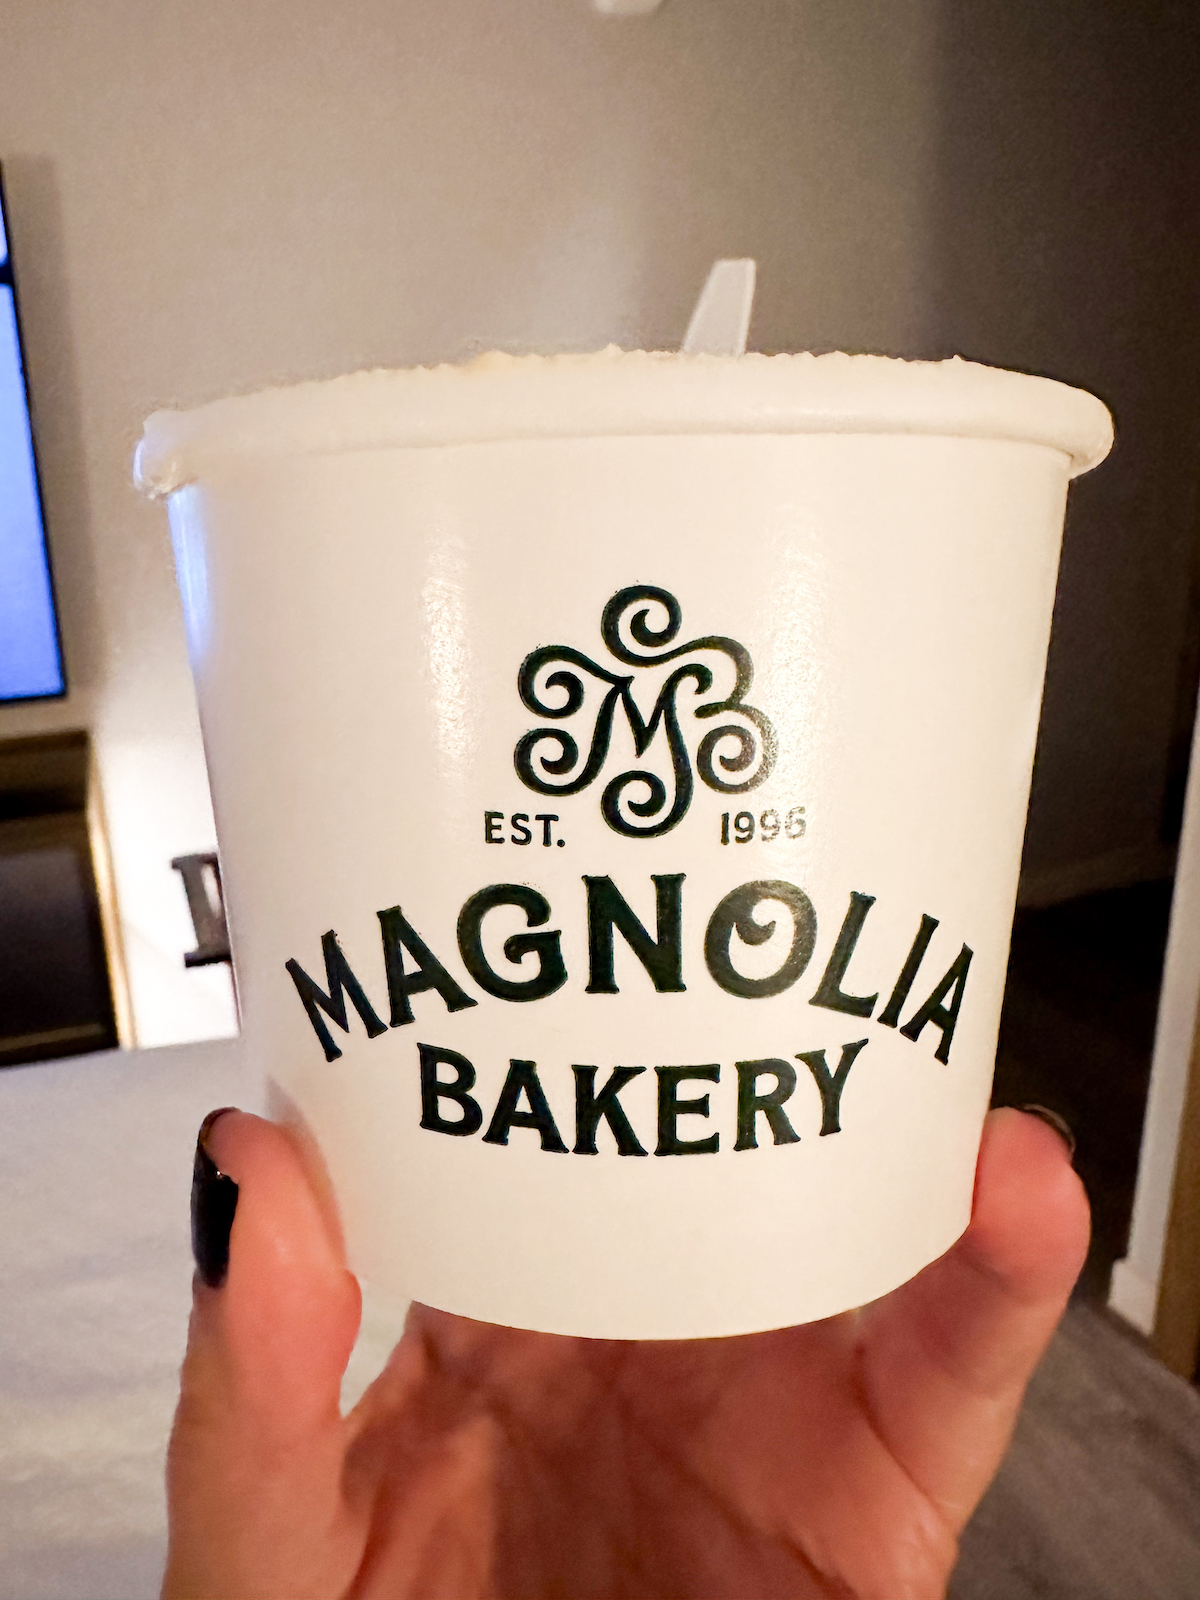 A cup of Magnolia Bakery's Banana Pudding with their name and logo.